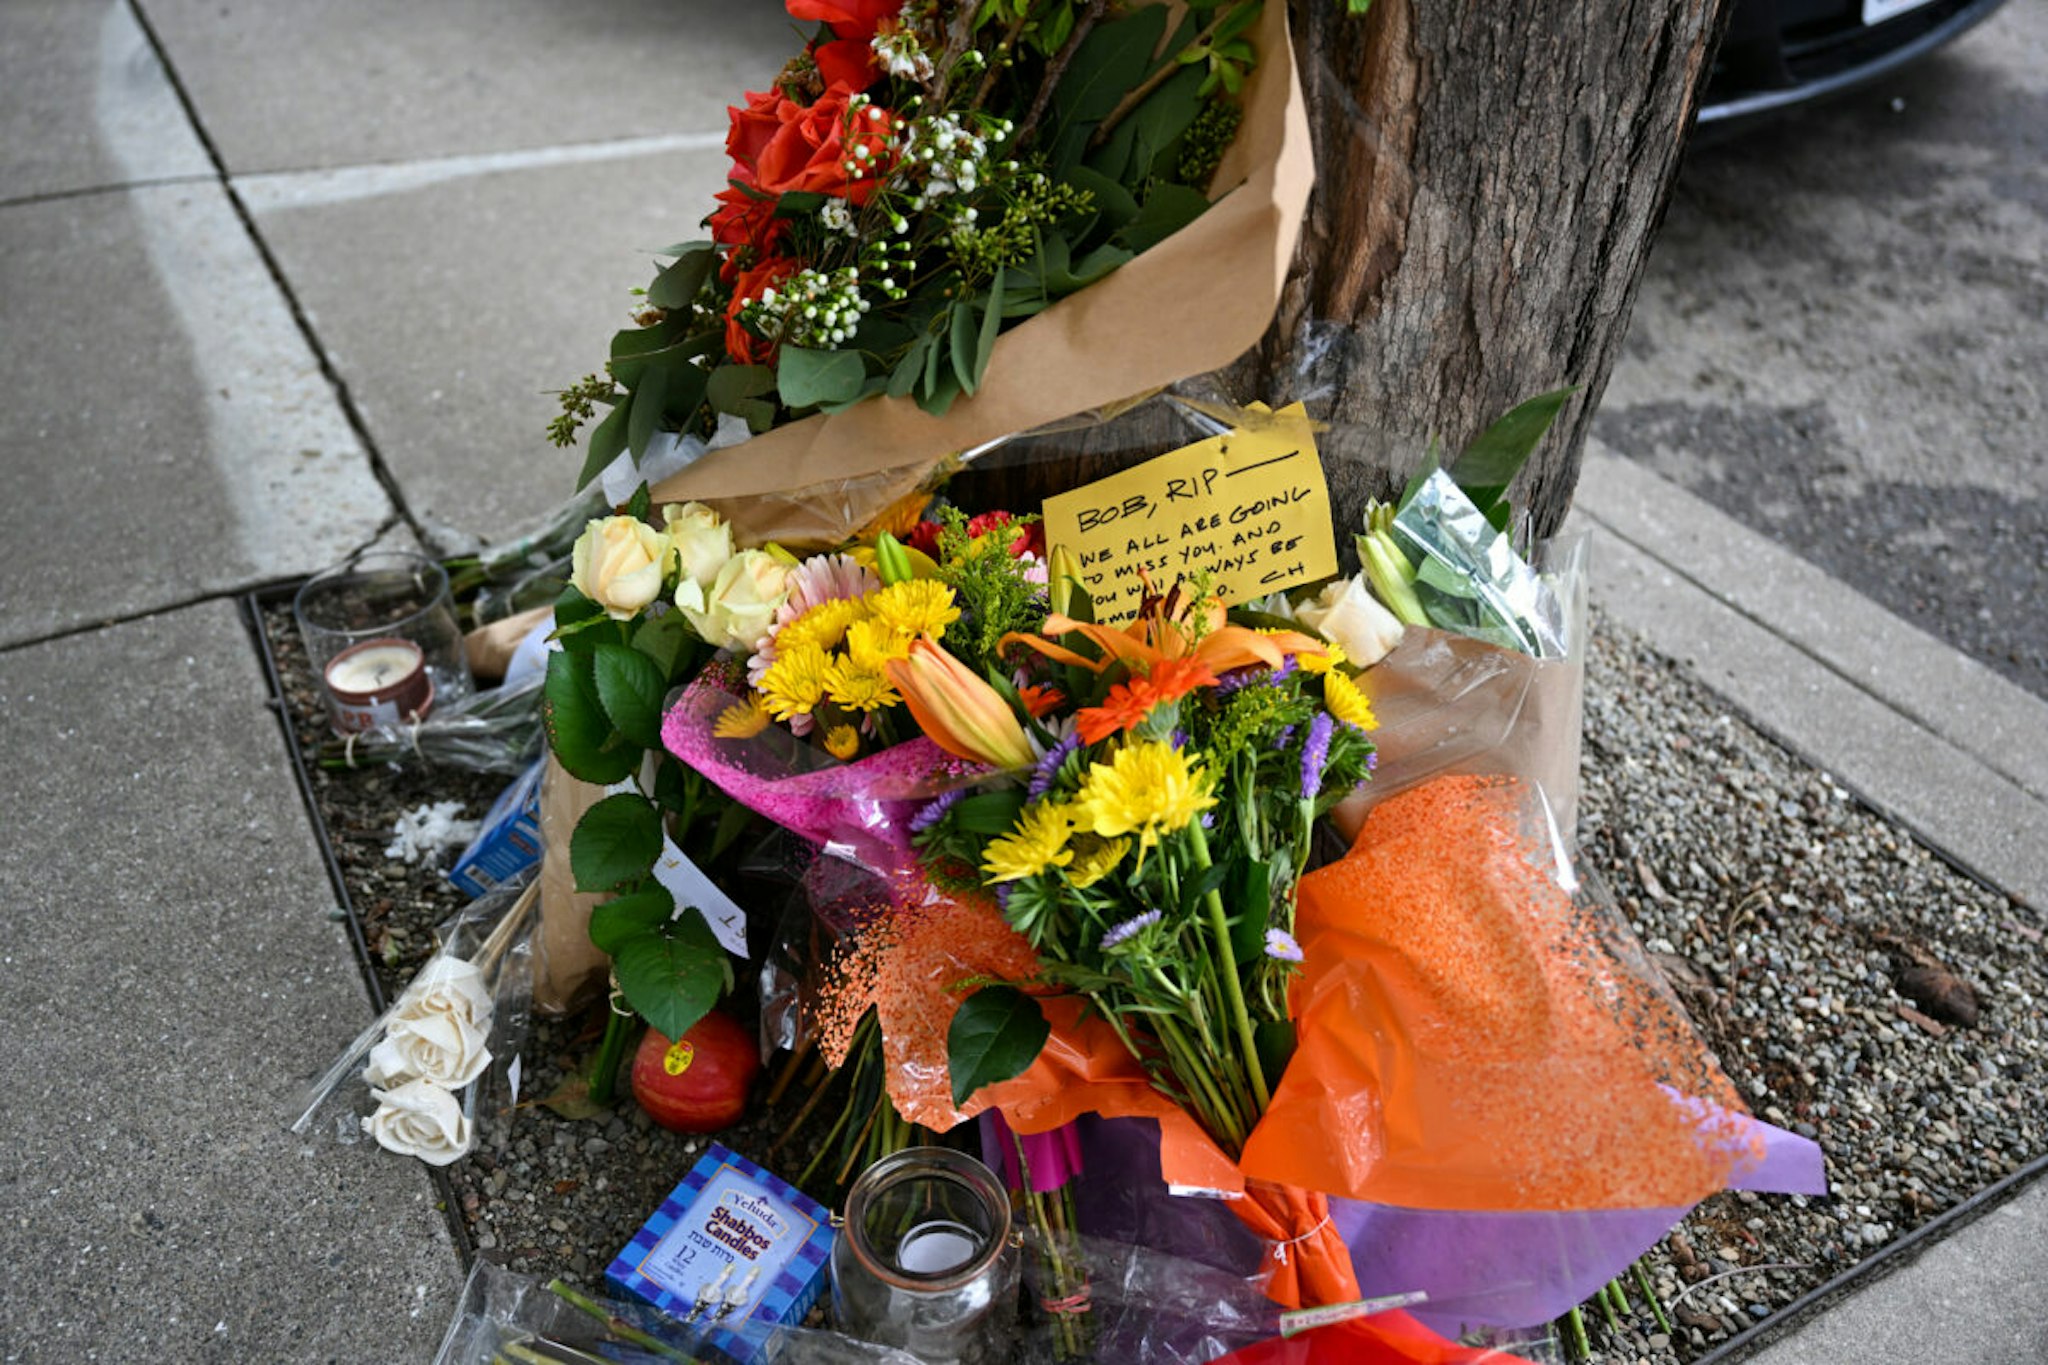 SAN FRANCISCO, CA - APRIL 7: Flowers and cards left as people paying tribute to Bob Lee near the Portside apartment building in San Francisco, California, United States on April 7, 2023. Bob Lee, the American technology entrepreneur who cofounded Cash App, the mobile payment service provider, was stabbed to death in the US city of San Francisco on Wednesday.